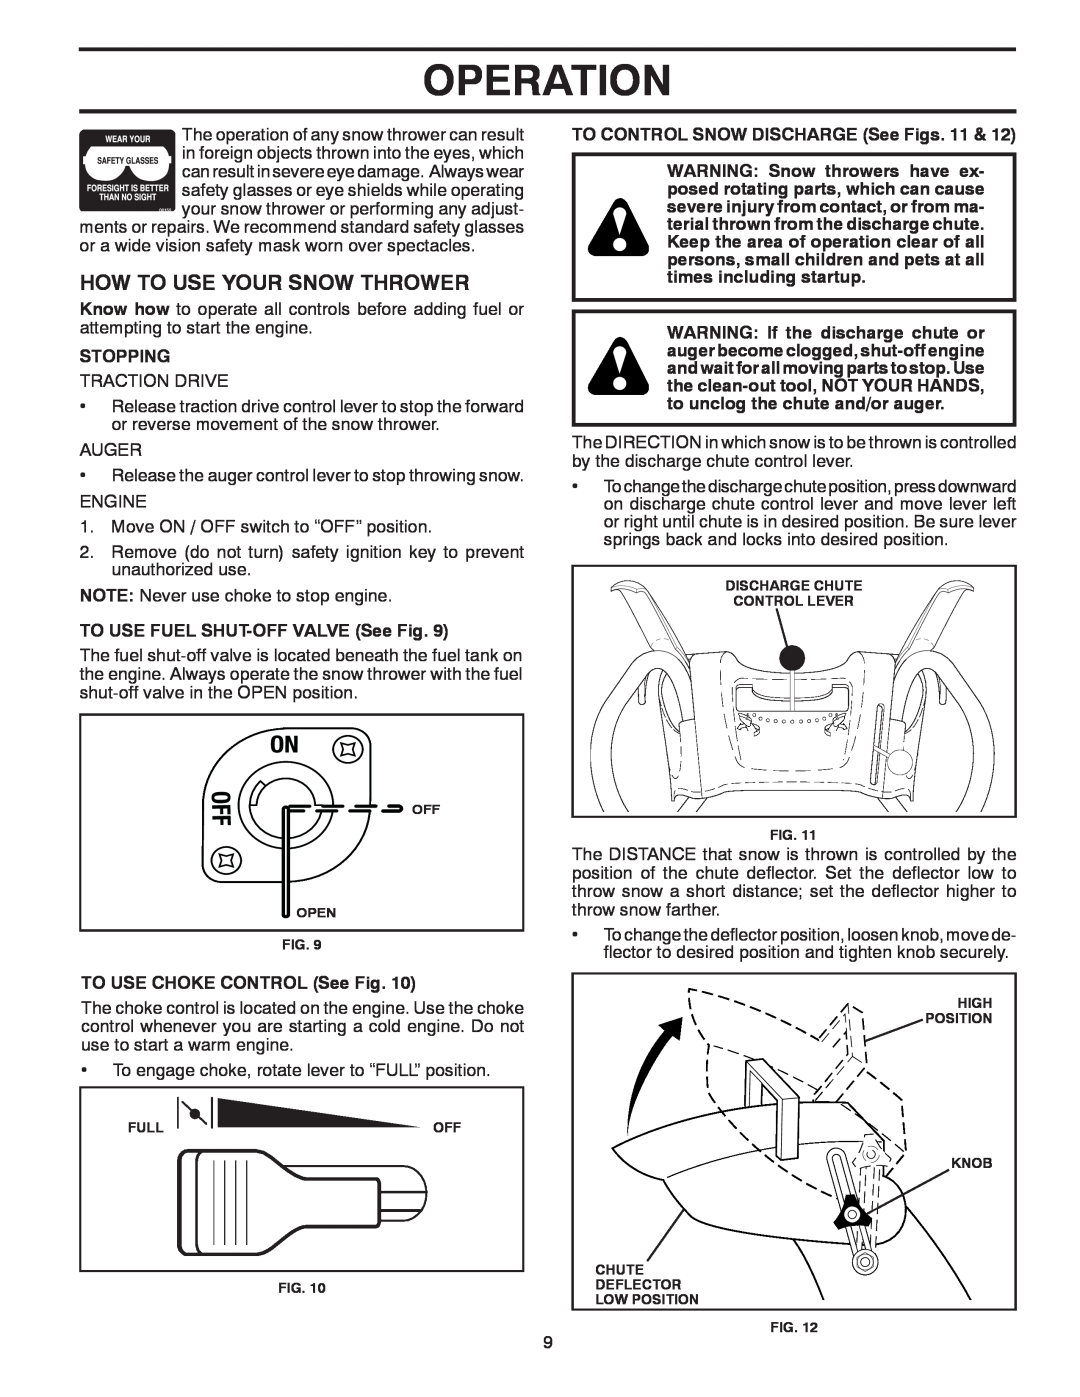 Poulan 428707, 96194000801 How To Use Your Snow Thrower, Operation, Stopping, TO USE FUEL SHUT-OFF VALVE See Fig 